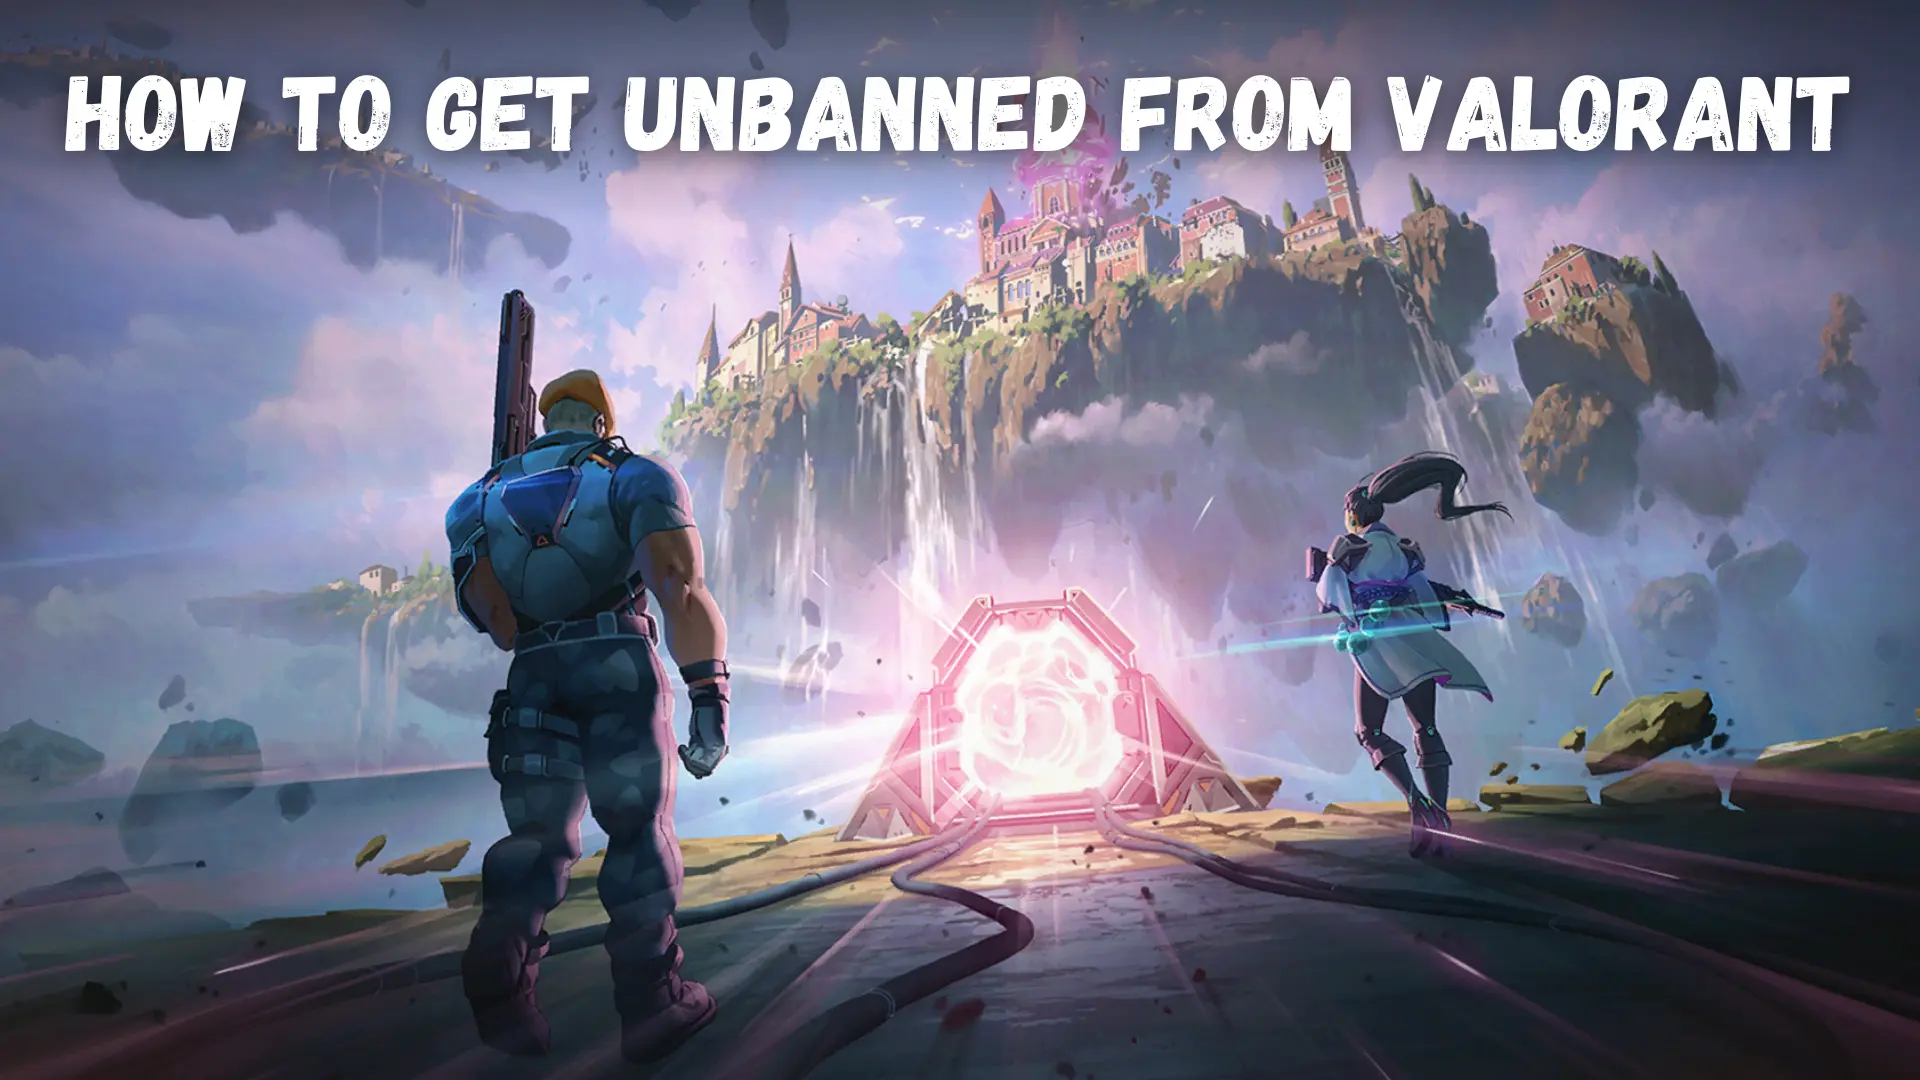 How to Get Unbanned from Valorant [Step-by-Step]